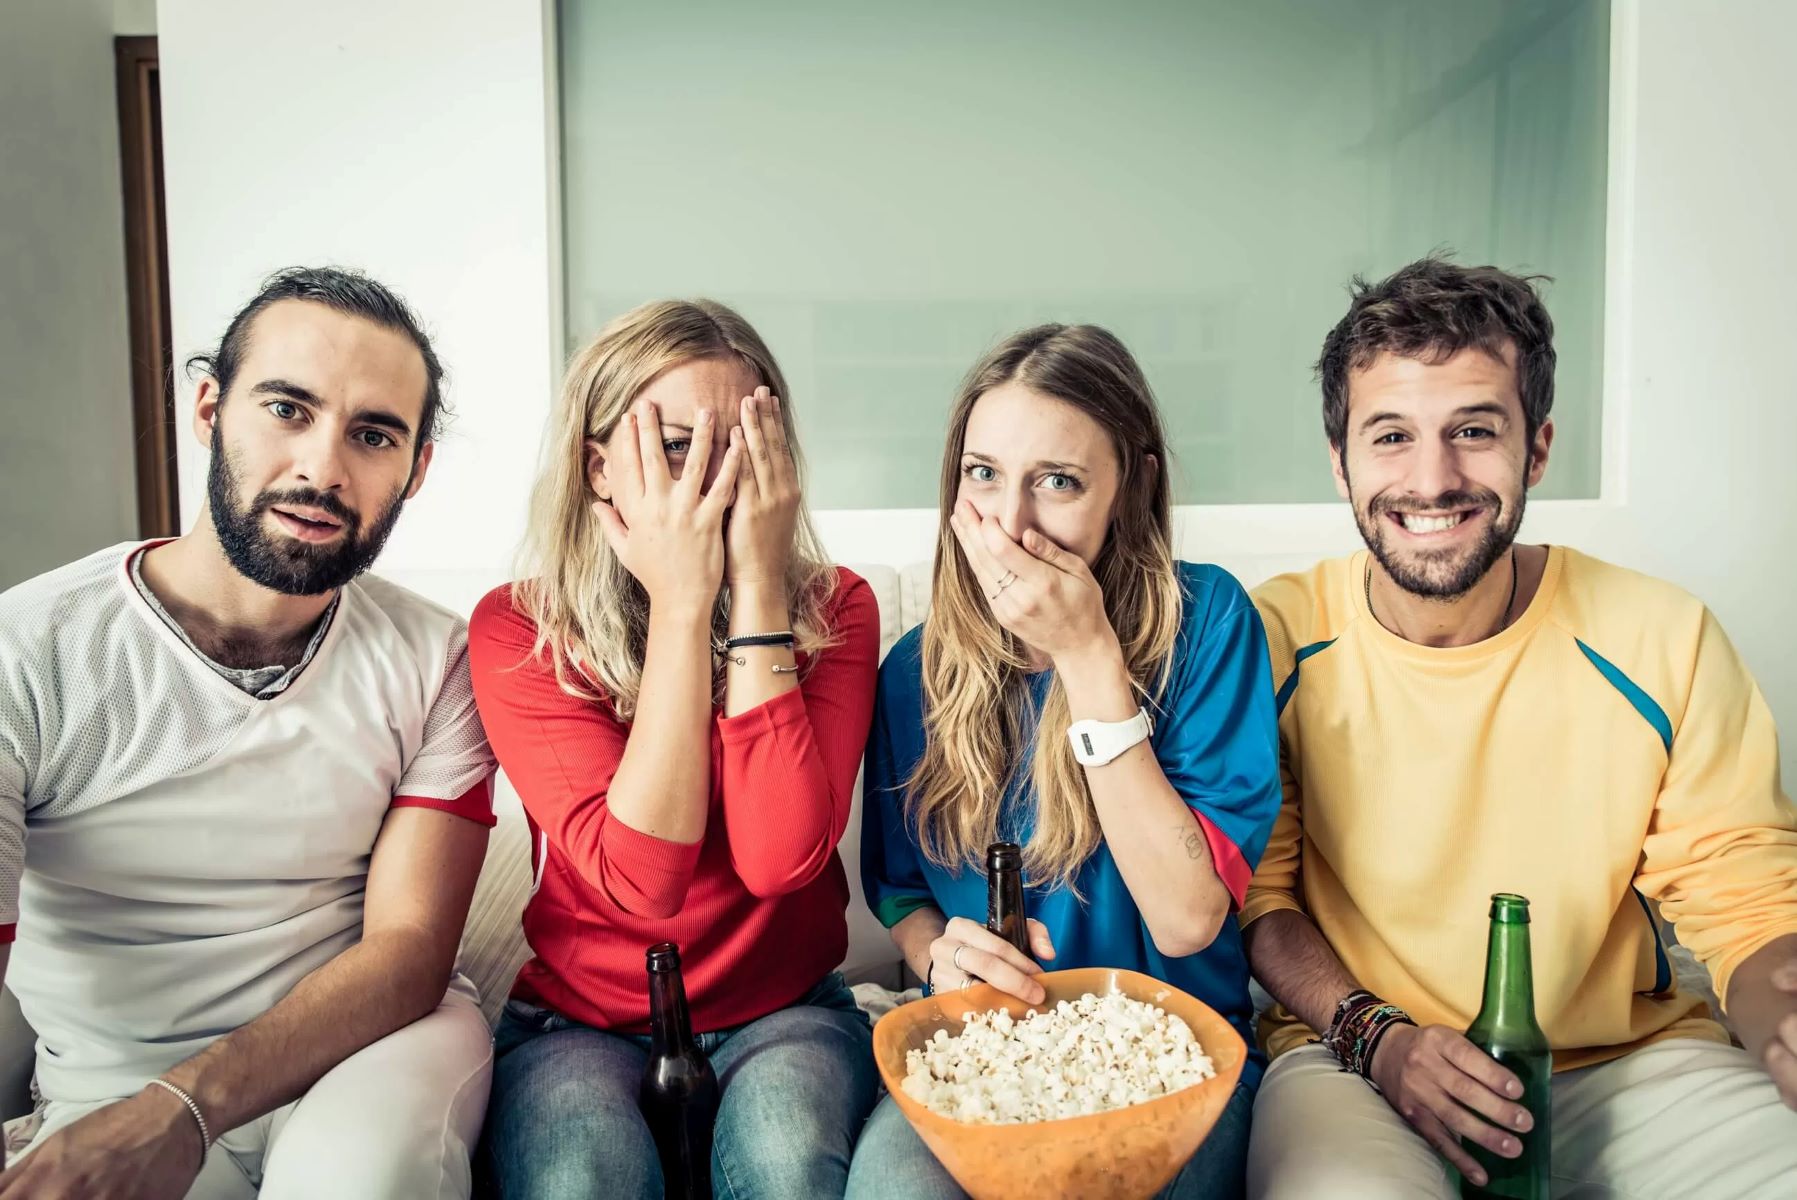 How To Watch Movie With Friends On Netflix